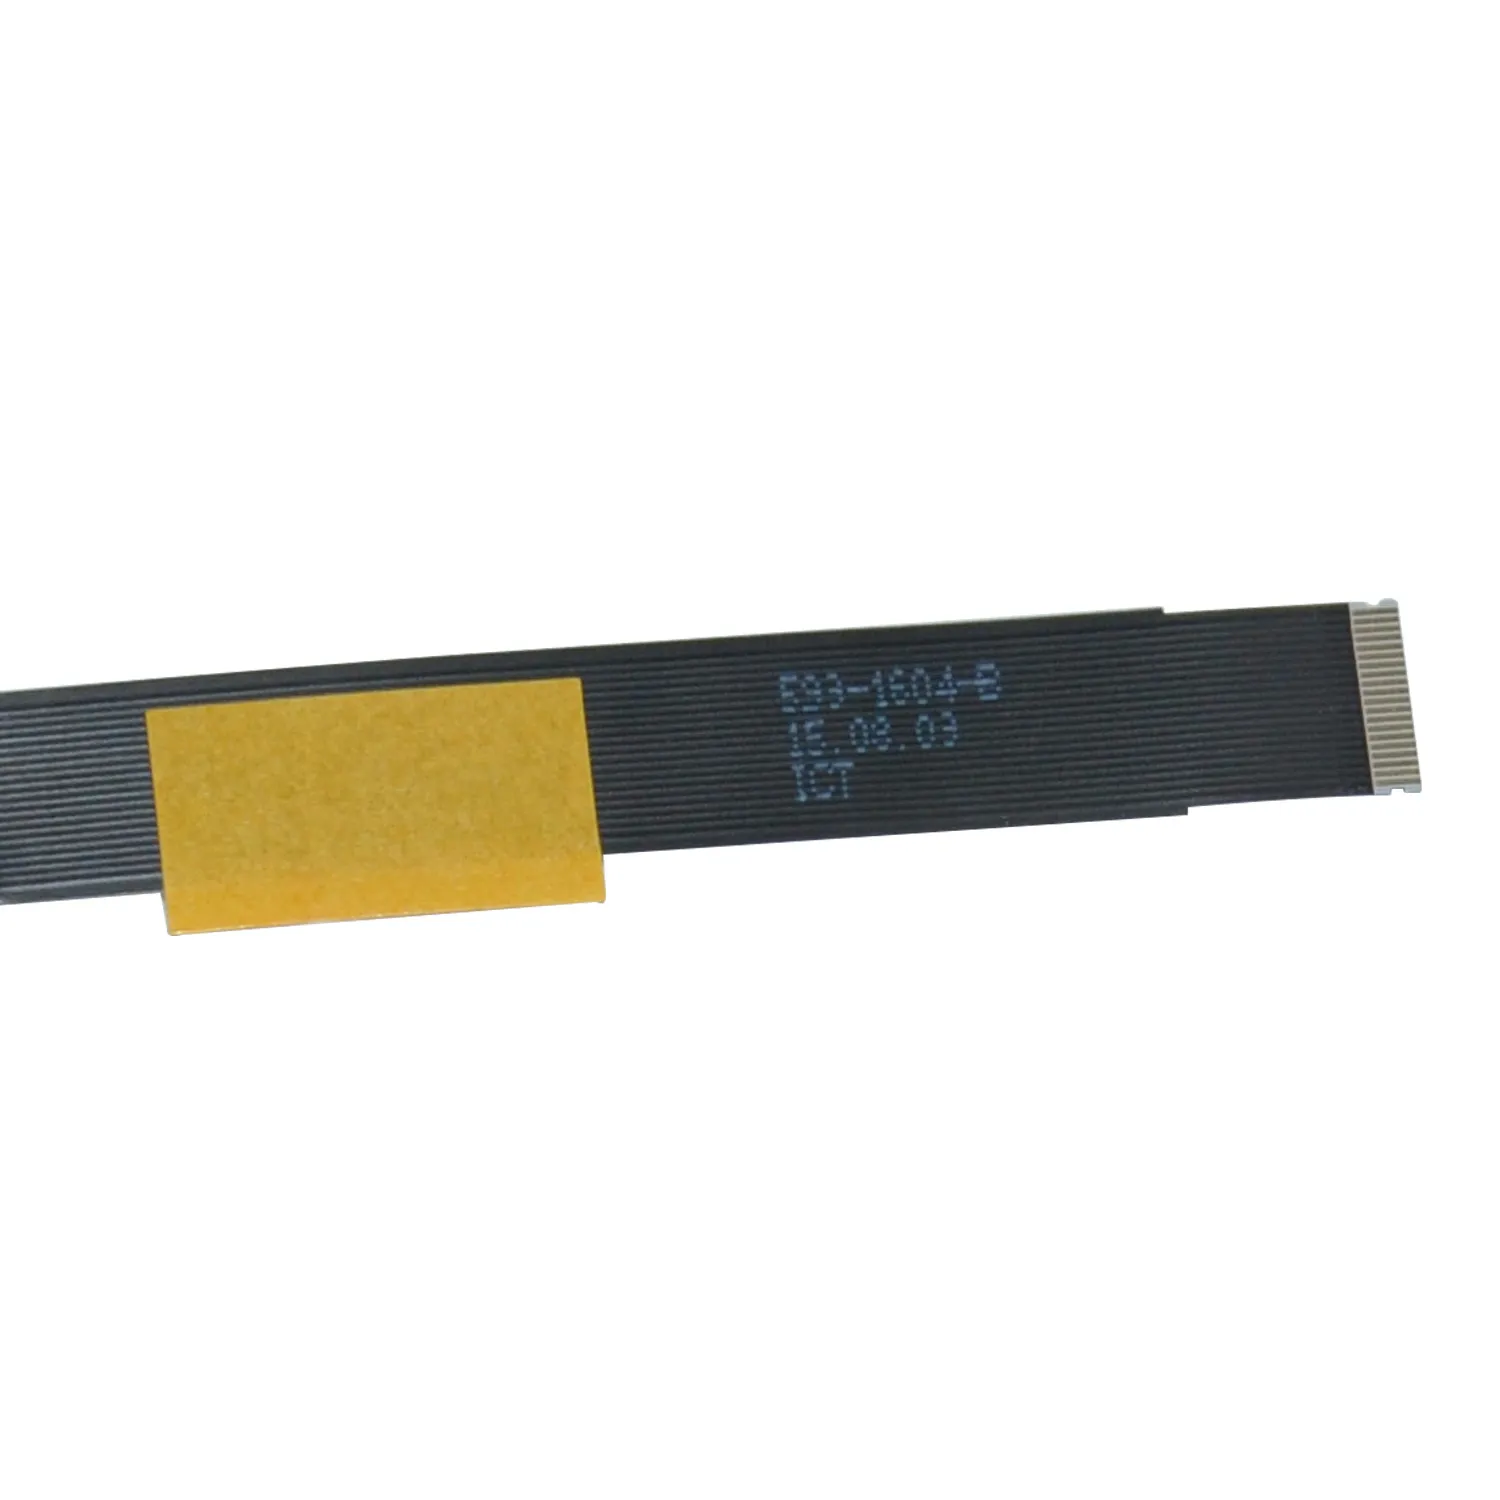 Nowy 593-1604-B 923-0441 Kabel do MacBook Air 13 cal A1466 Trackpad TouchPad Ribbon Flex Cable 2013 2014 2015 Rok